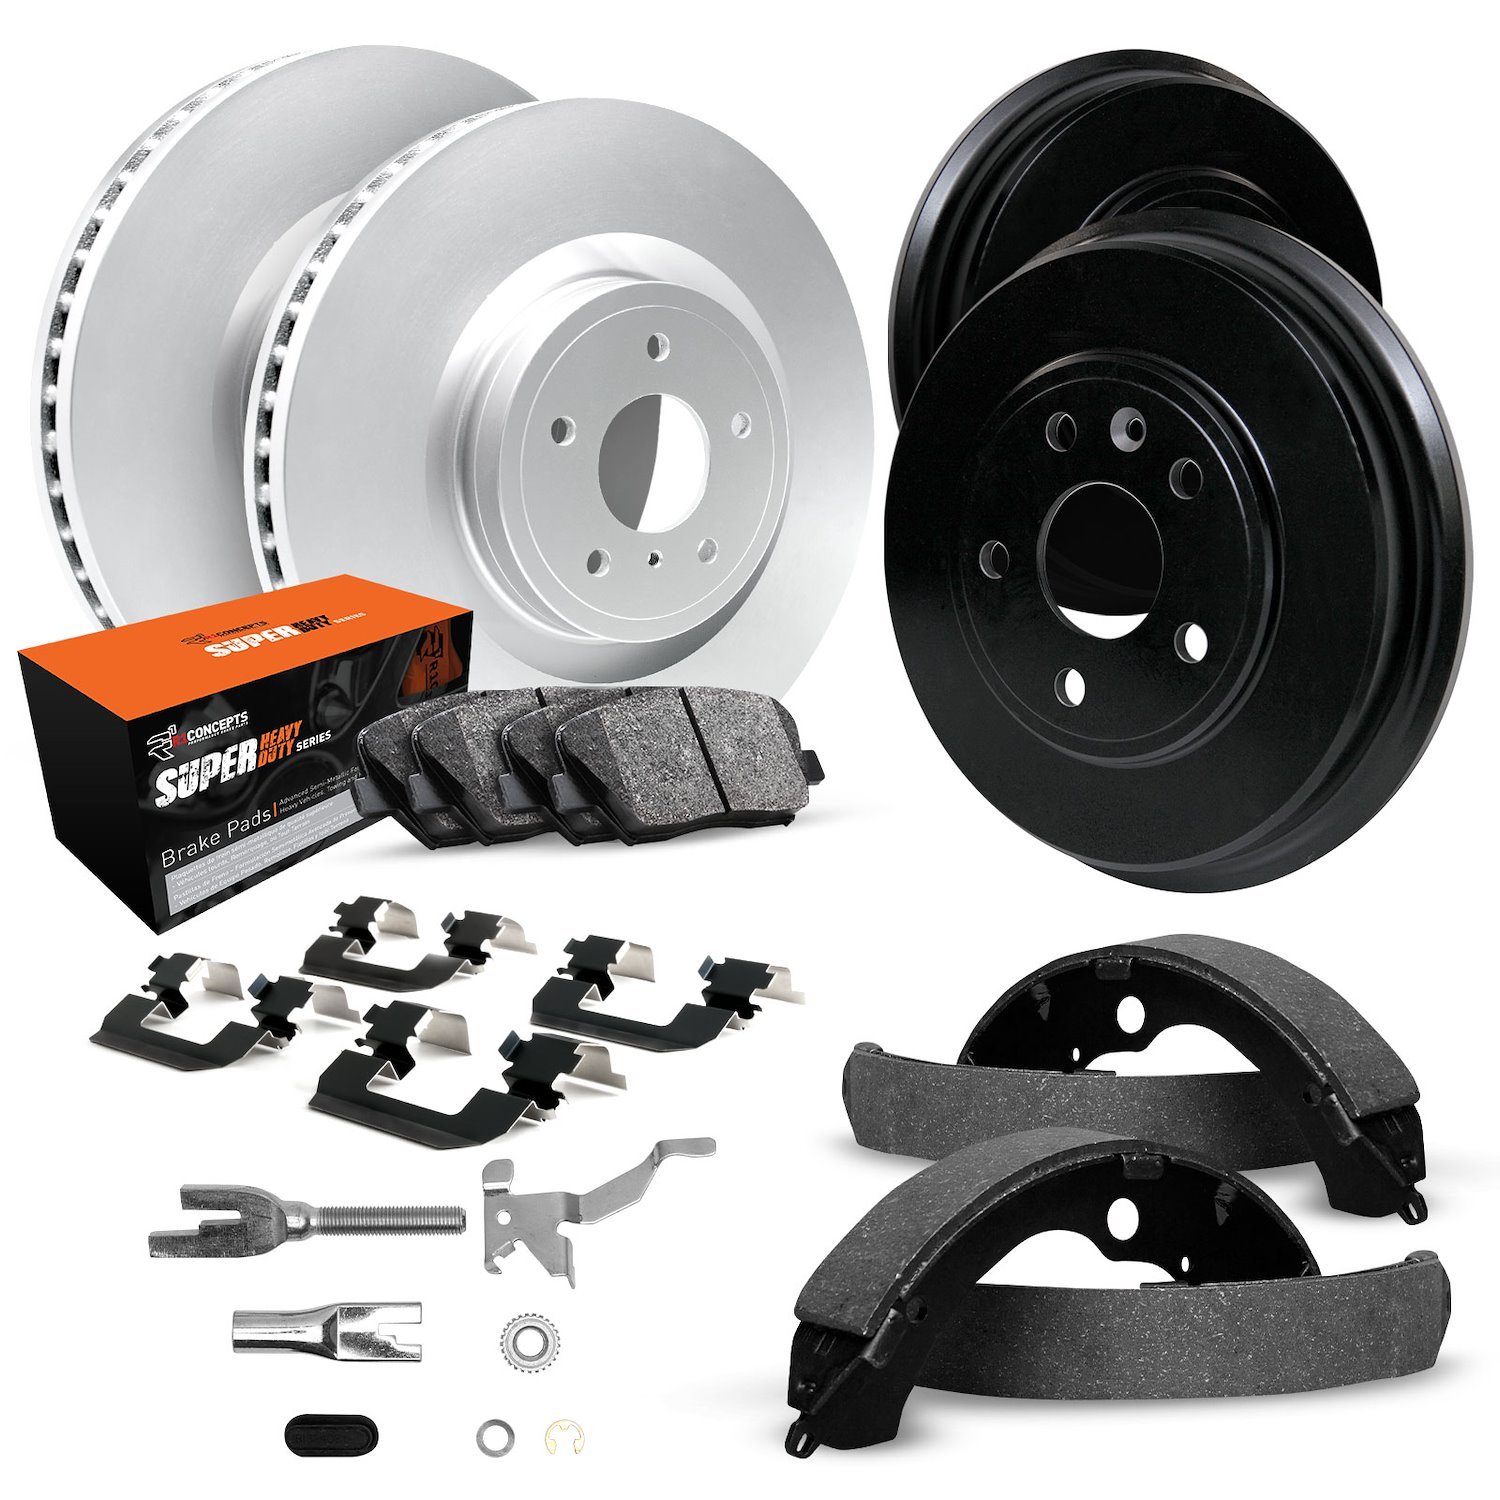 GEO-Carbon Brake Rotor & Drum Set w/Super-Duty Pads, Shoes, Hardware/Adjusters, 1997-1999 Ford/Lincoln/Mercury/Mazda